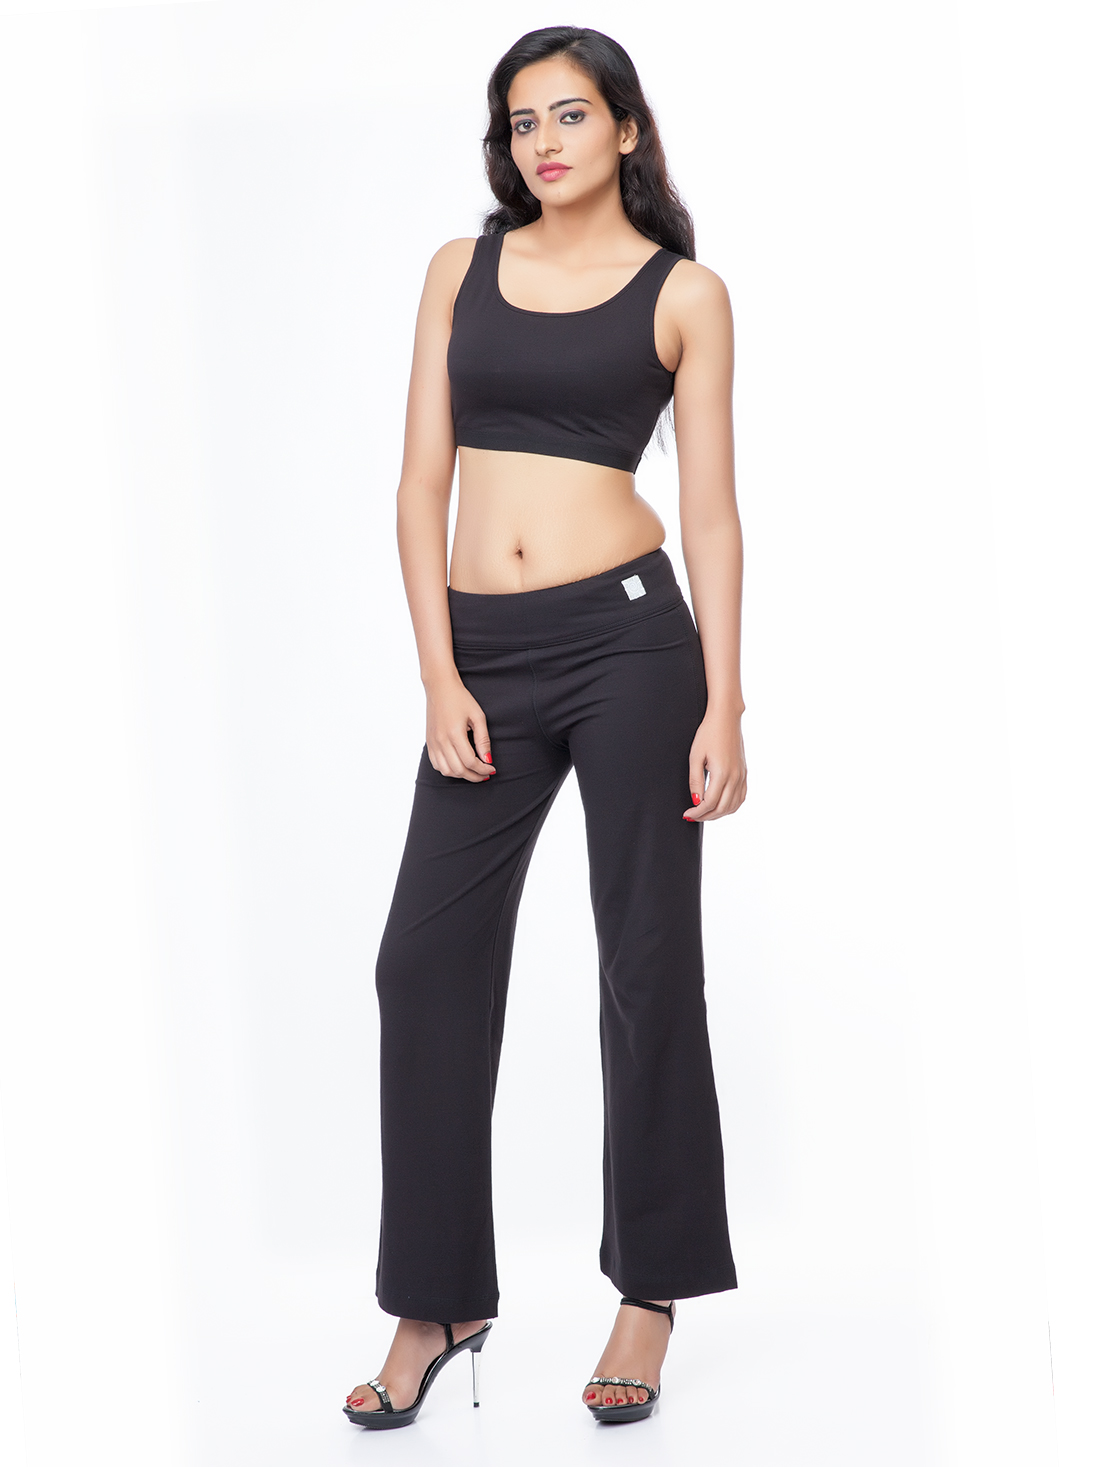 Buy Yoga Gym trouser Online @ ₹499 from ShopClues